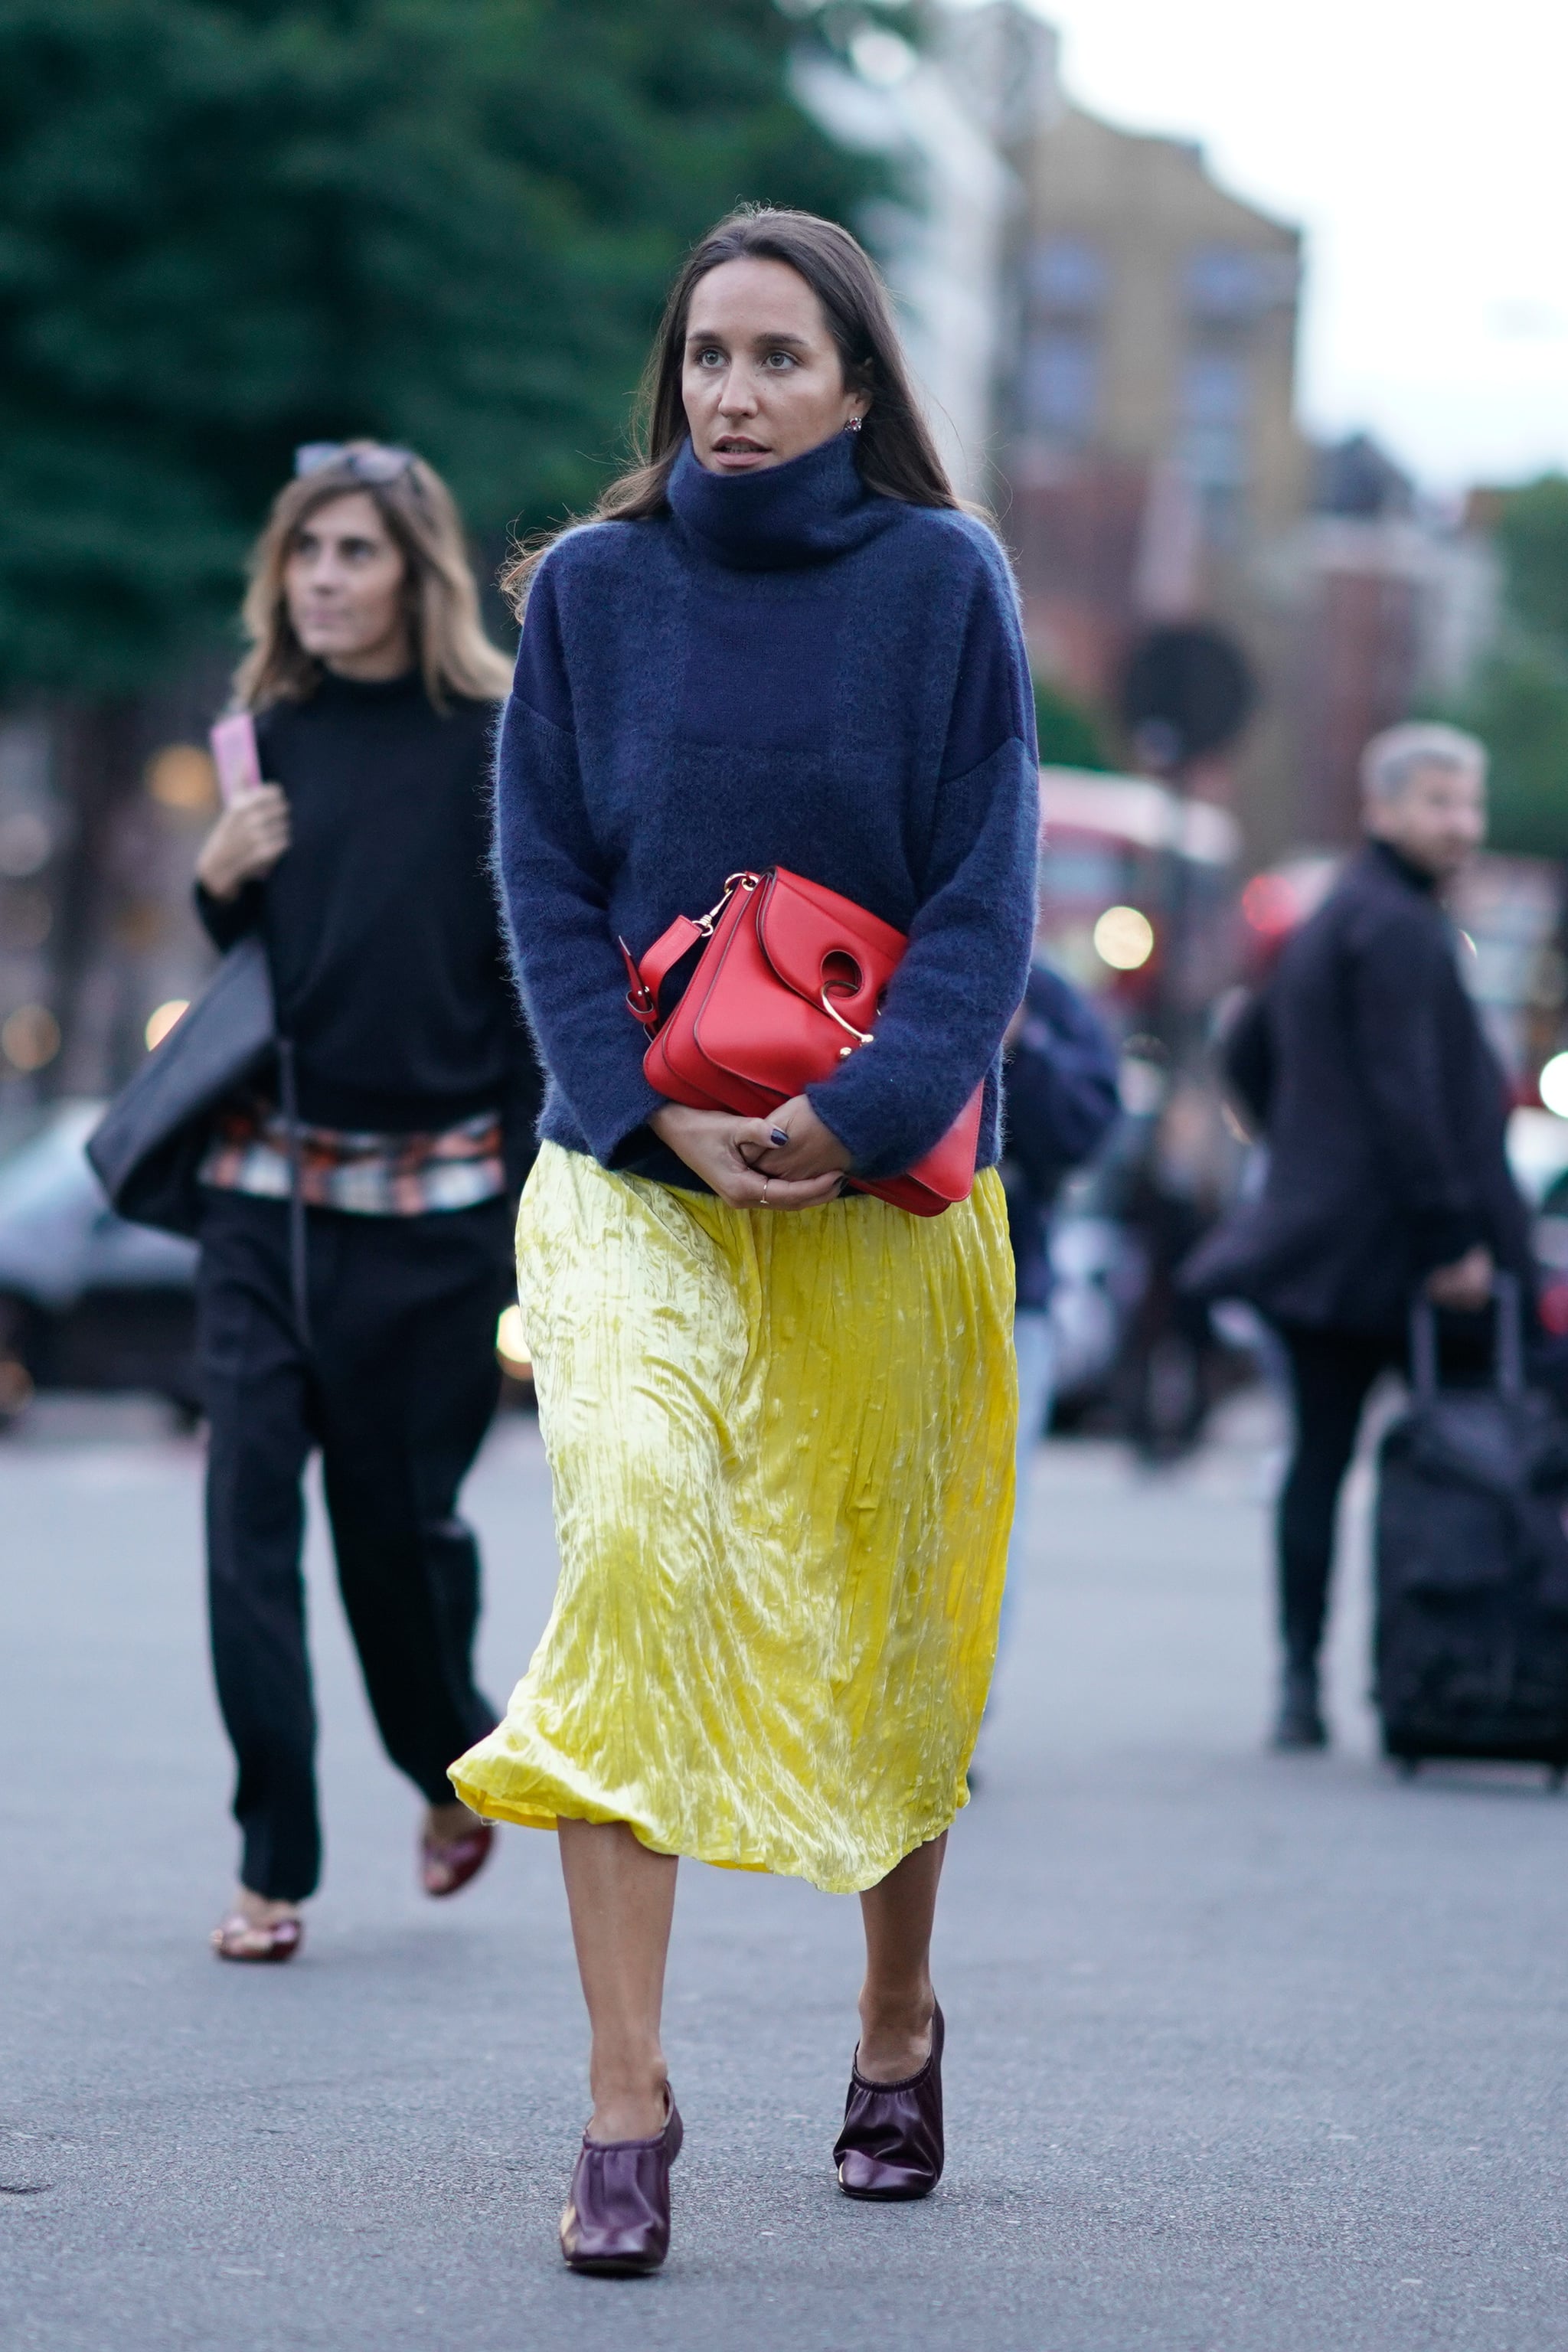 Contrast Fabrics When You Throw a Wool Sweater Over Your Silk Slip and Wear Satin Booties